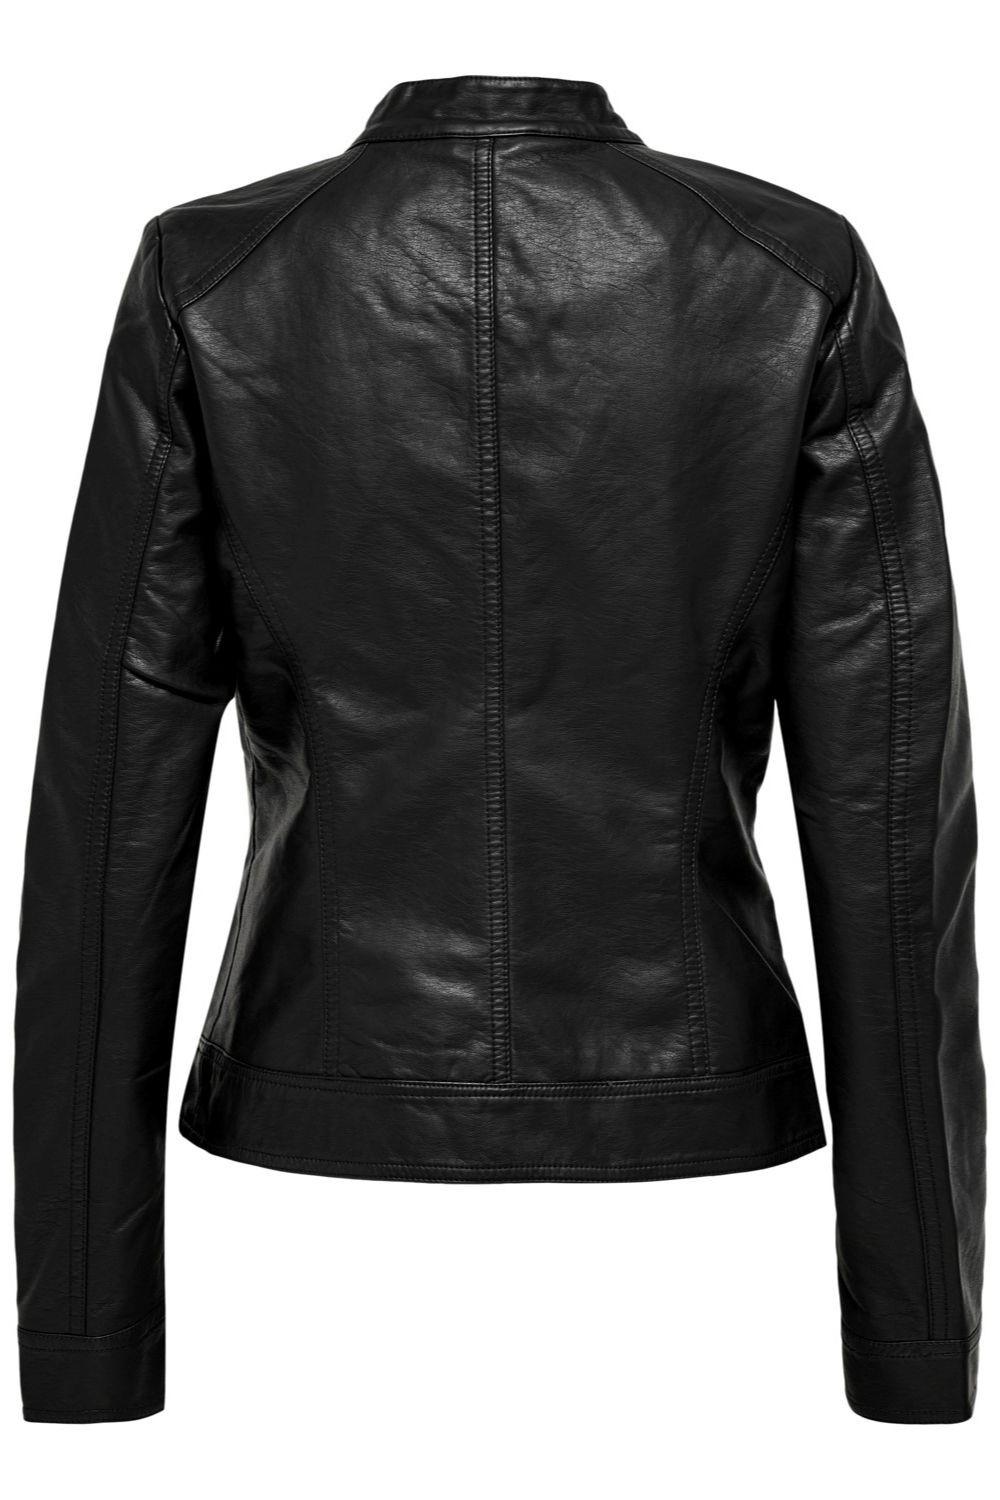 Only Bandit Faux Leather Biker Jacket in Black | iCLOTHING